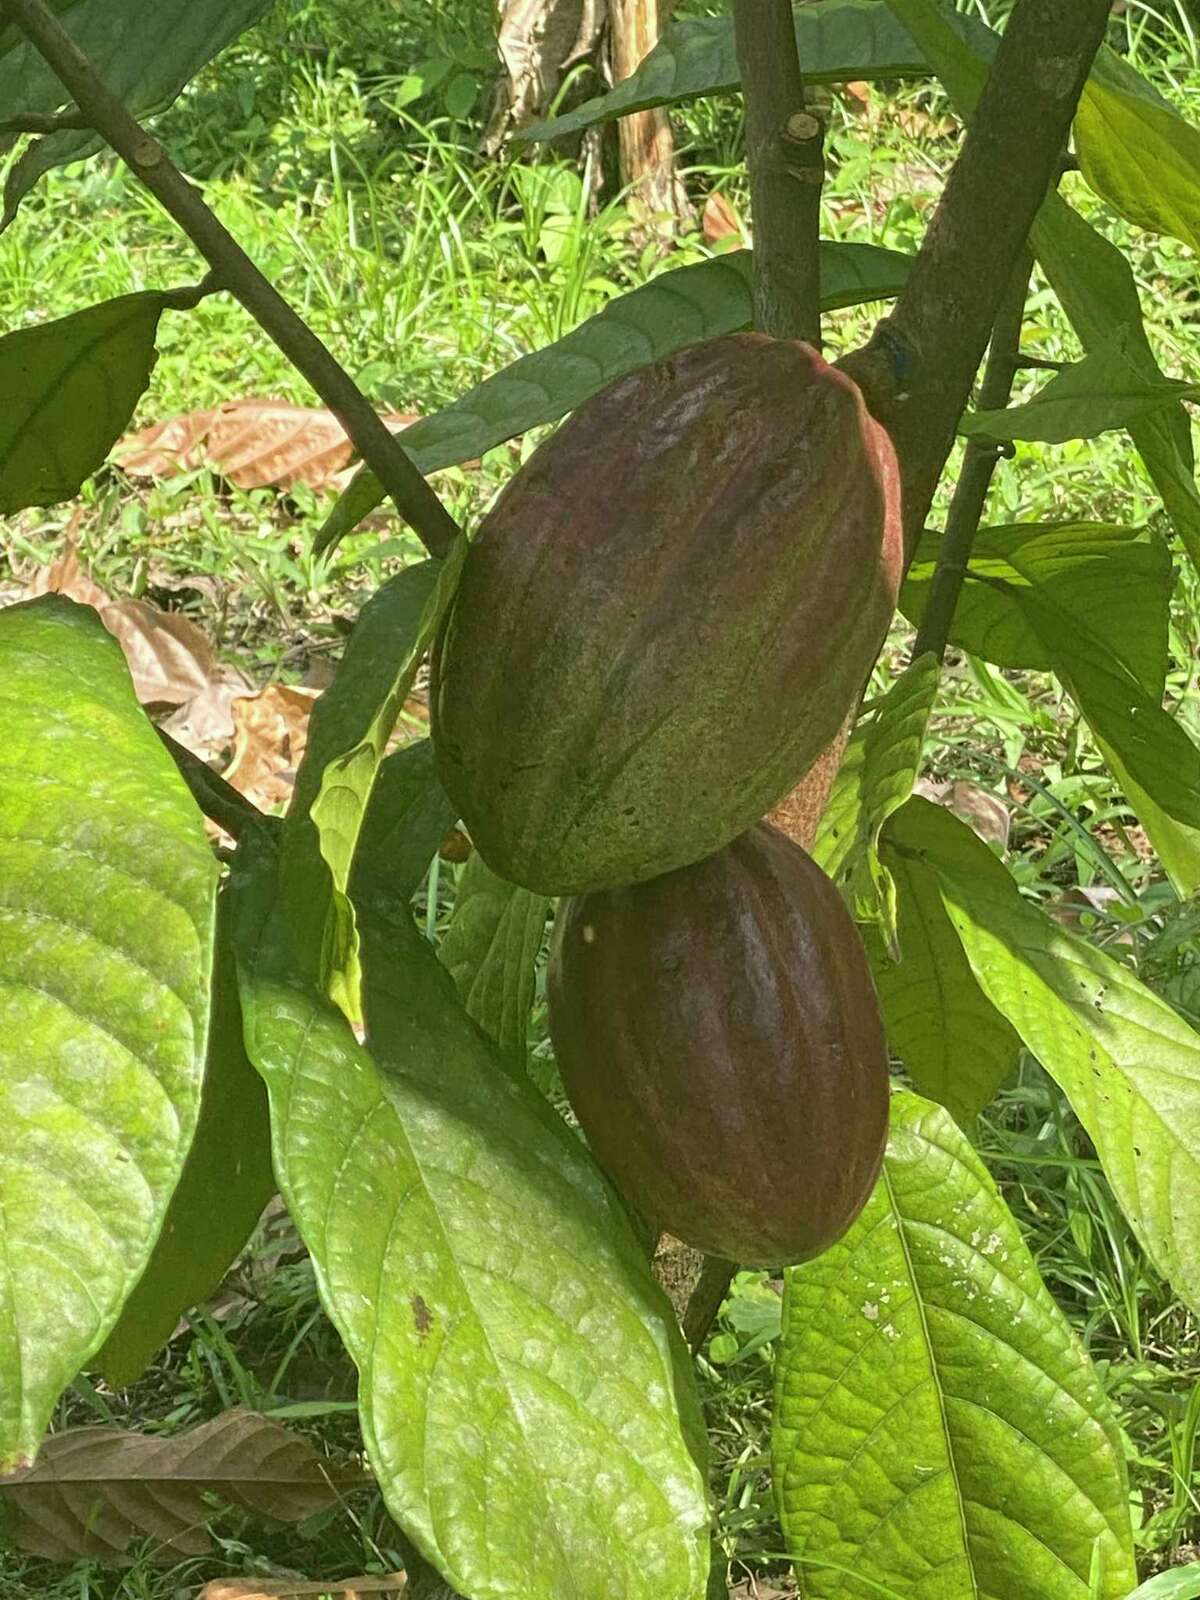 The fruit of the Theobroma tree contains pods that hold cacao beans, the main ingredient in chocolate.